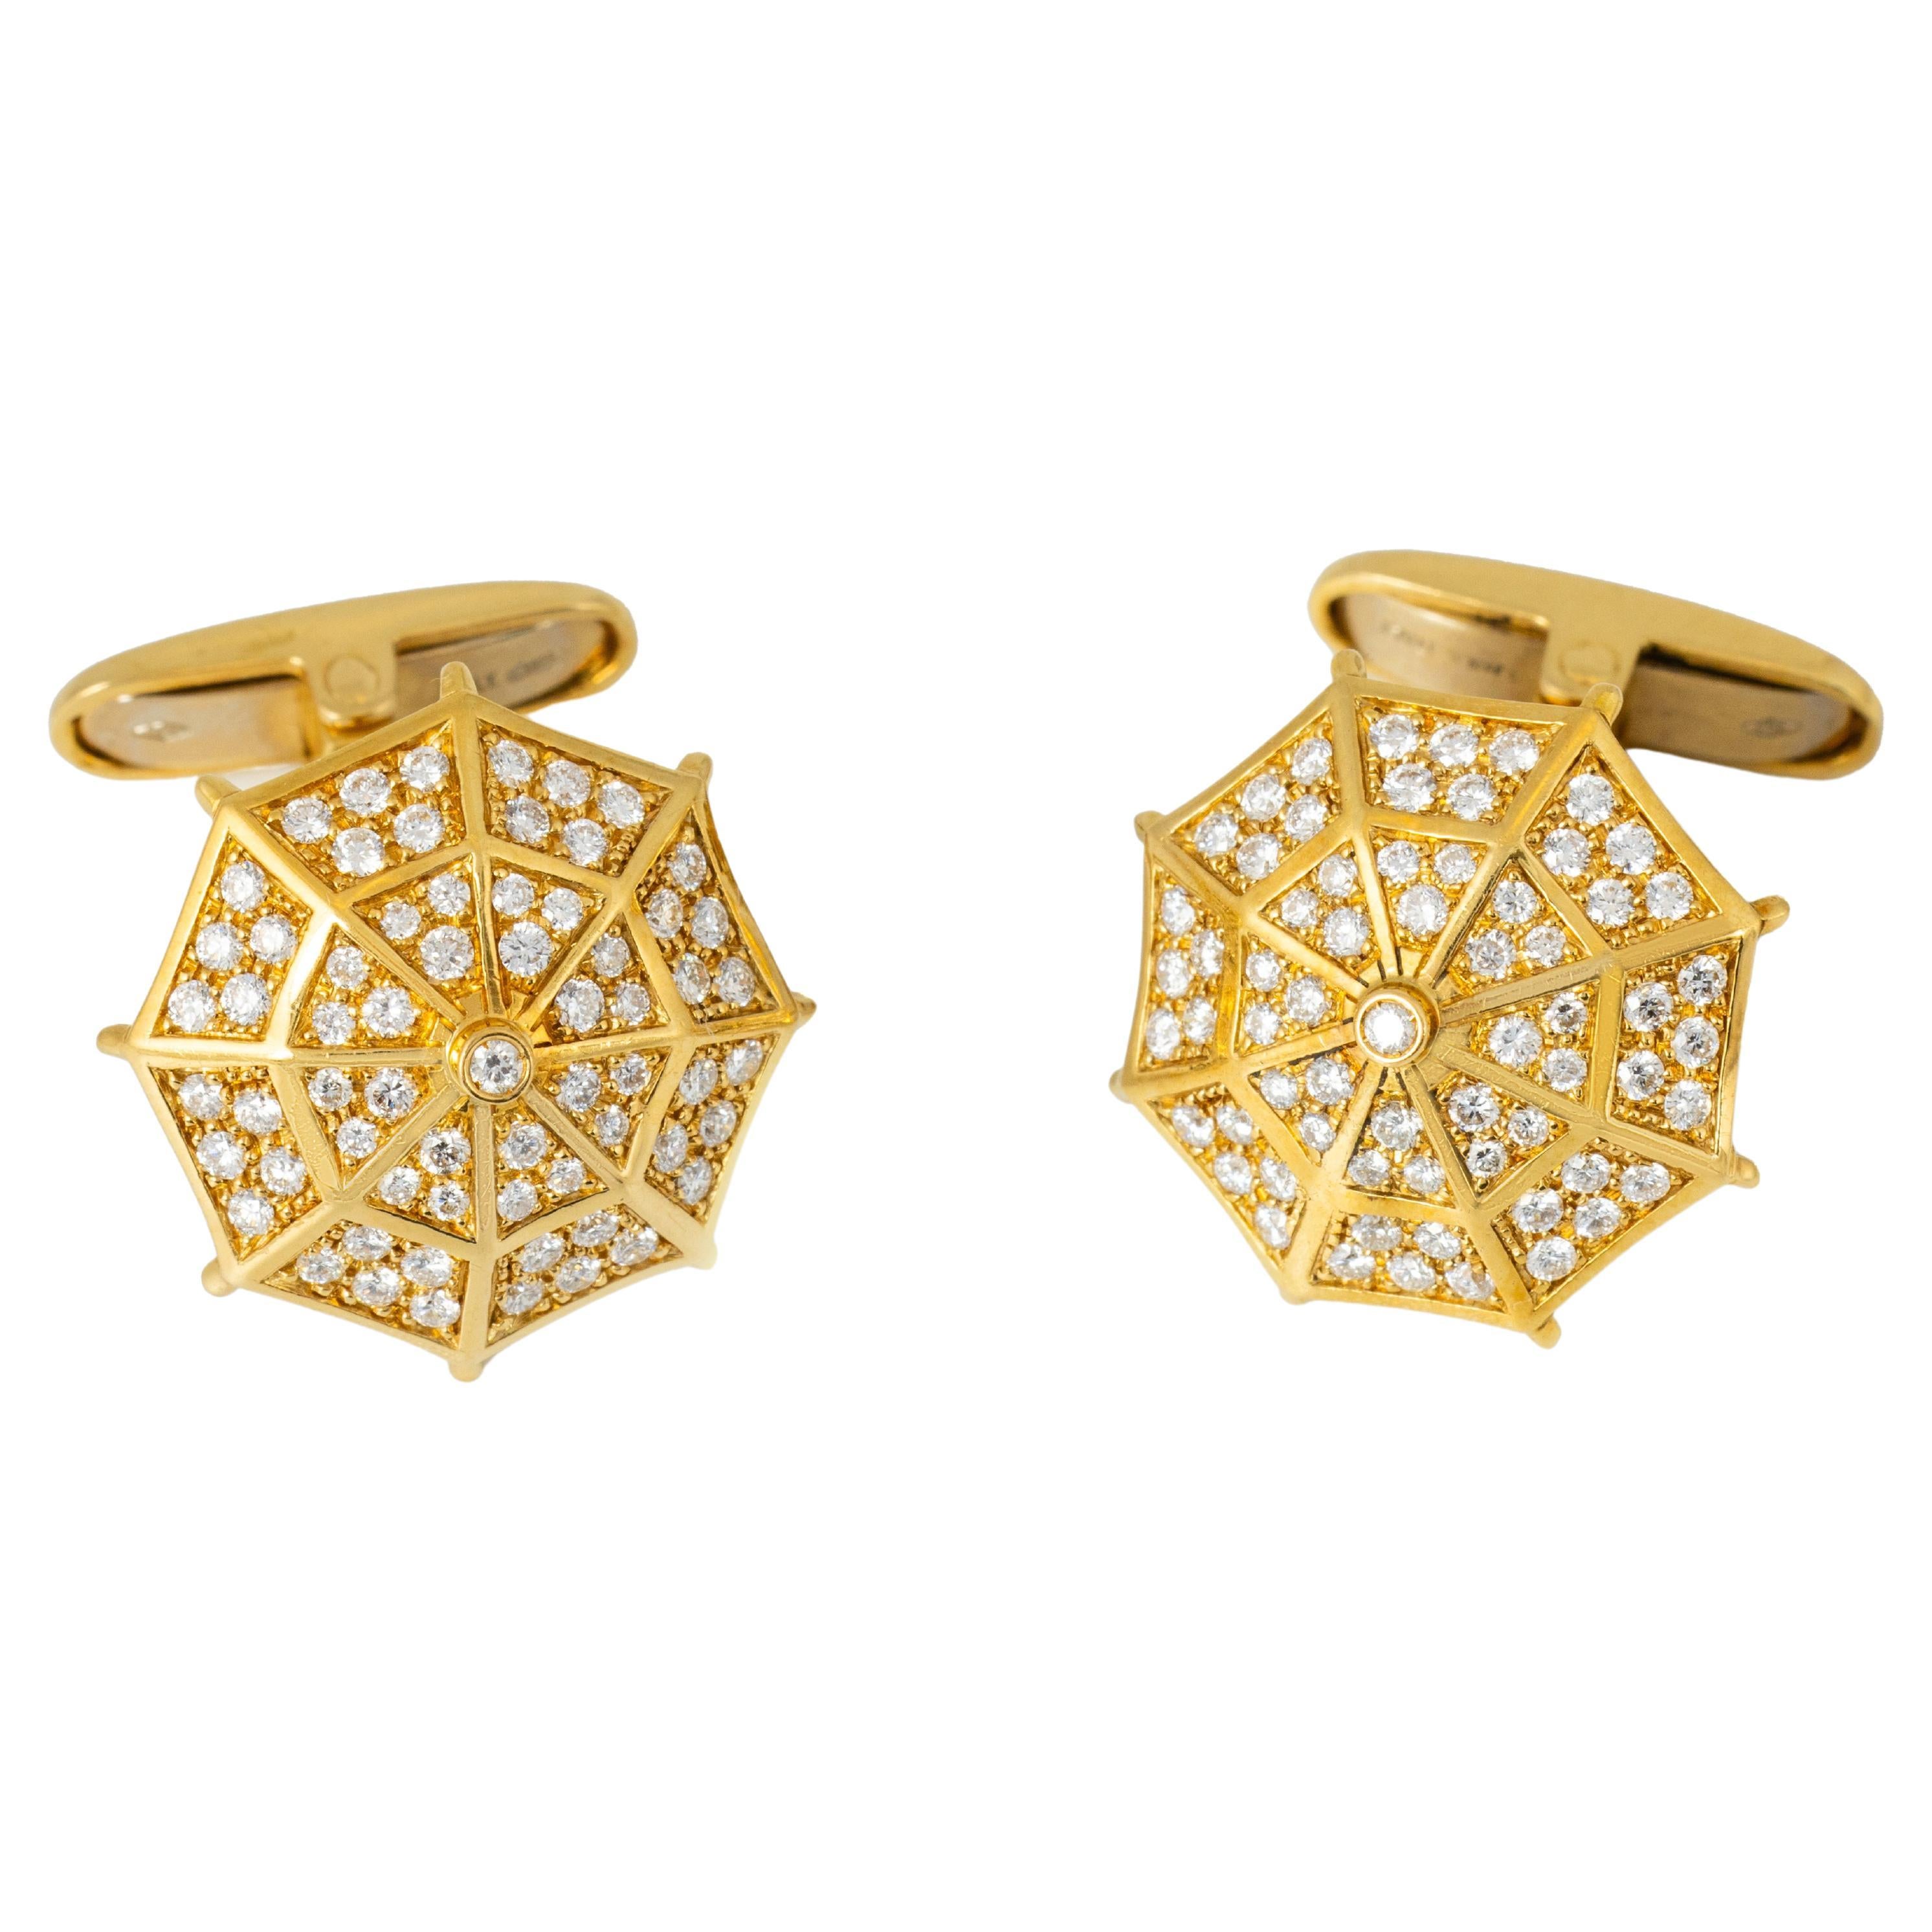 "Costis" Umbrella Collection Cufflinks YG - Pave' with 1.19 carats Diamonds  For Sale